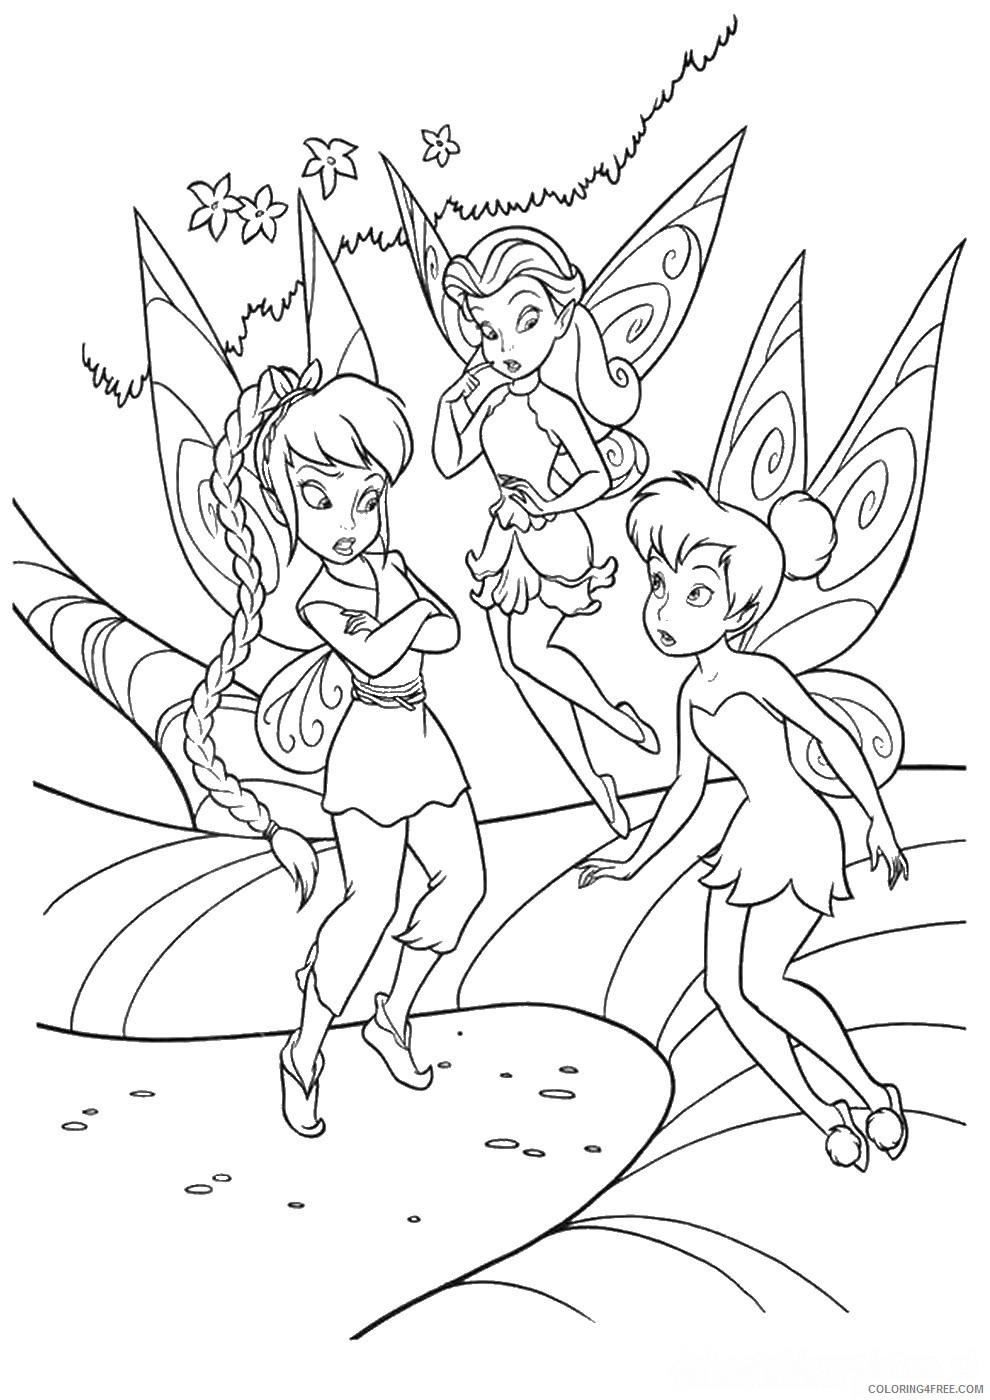 Tinker Bell Coloring Pages Cartoons tinkerbell_cl_35 Printable 2020 6642 Coloring4free